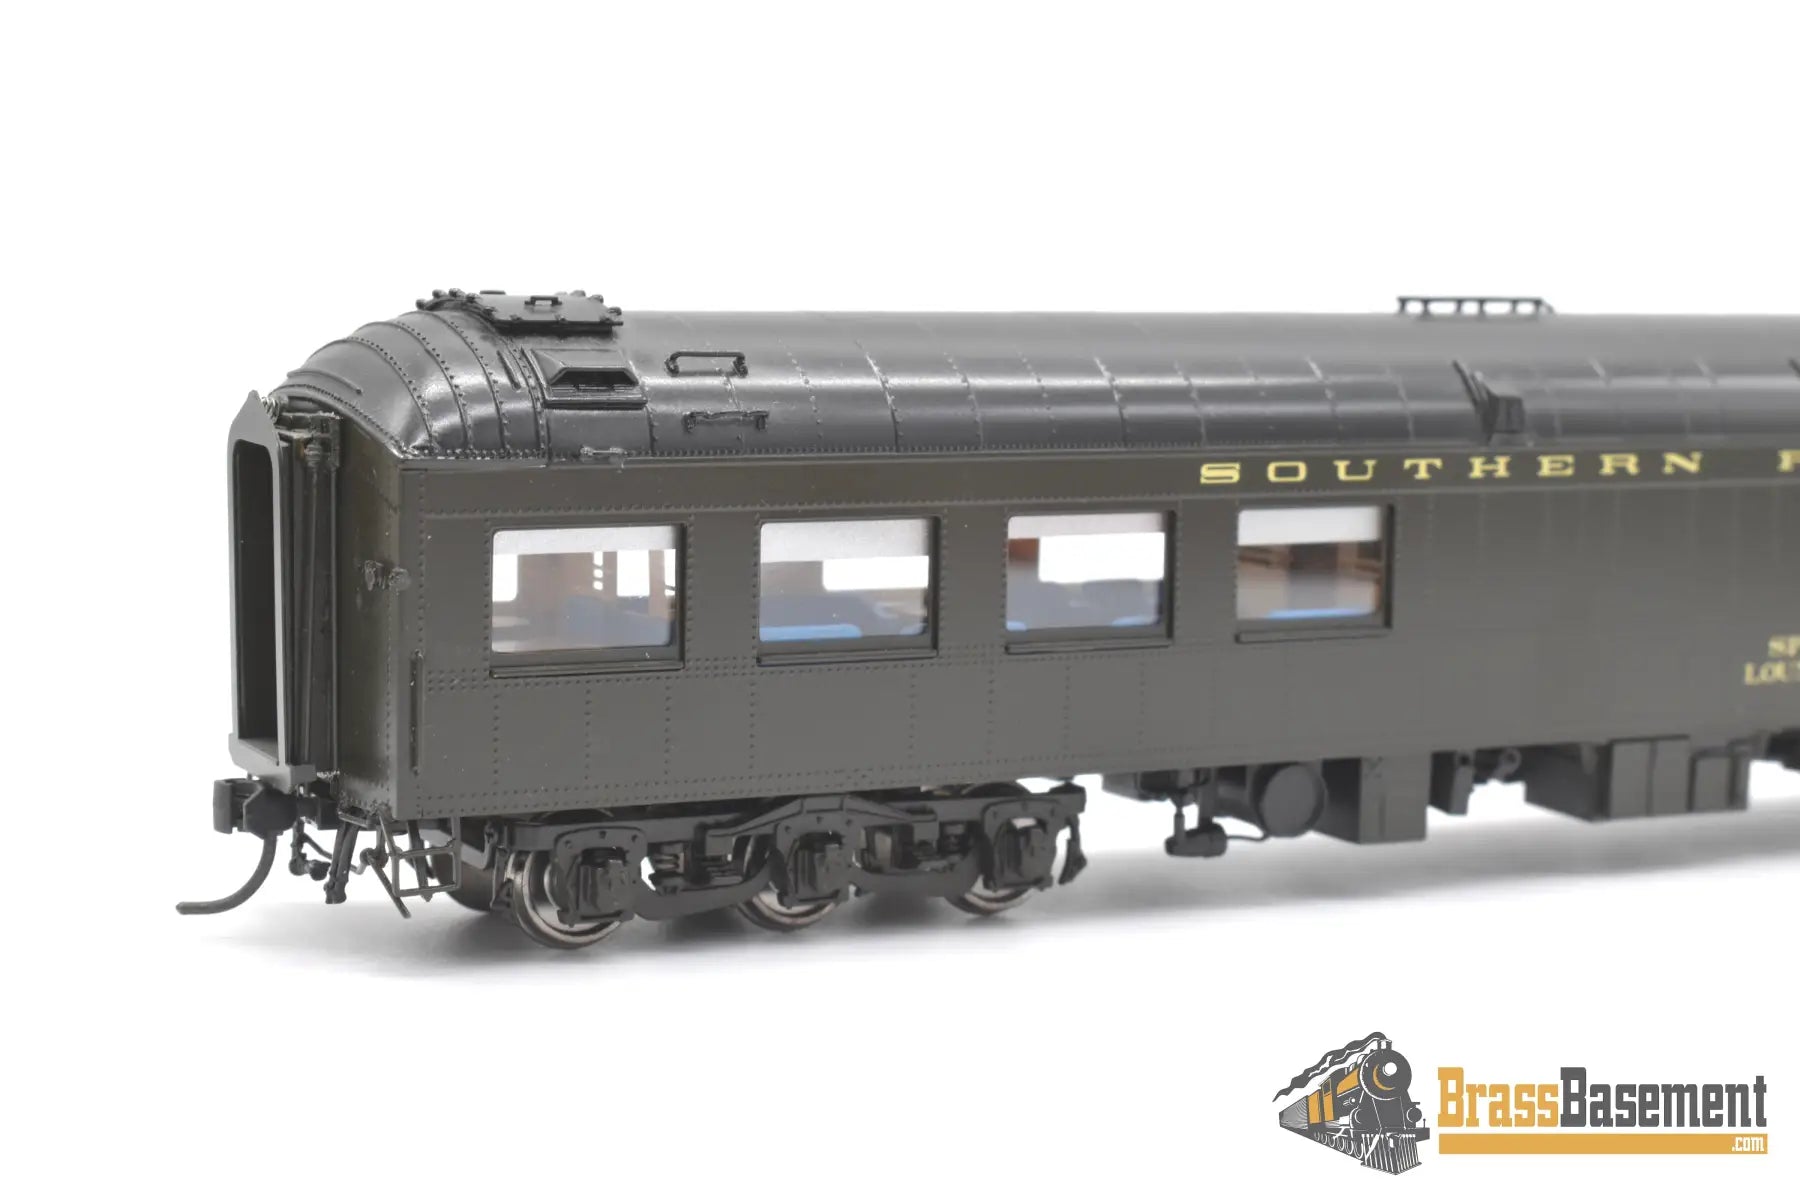 Ho Brass - Tcy 0915.1 Southern Pacific Lines Spl #2976 Lounge 77 - L Full Interior Passenger